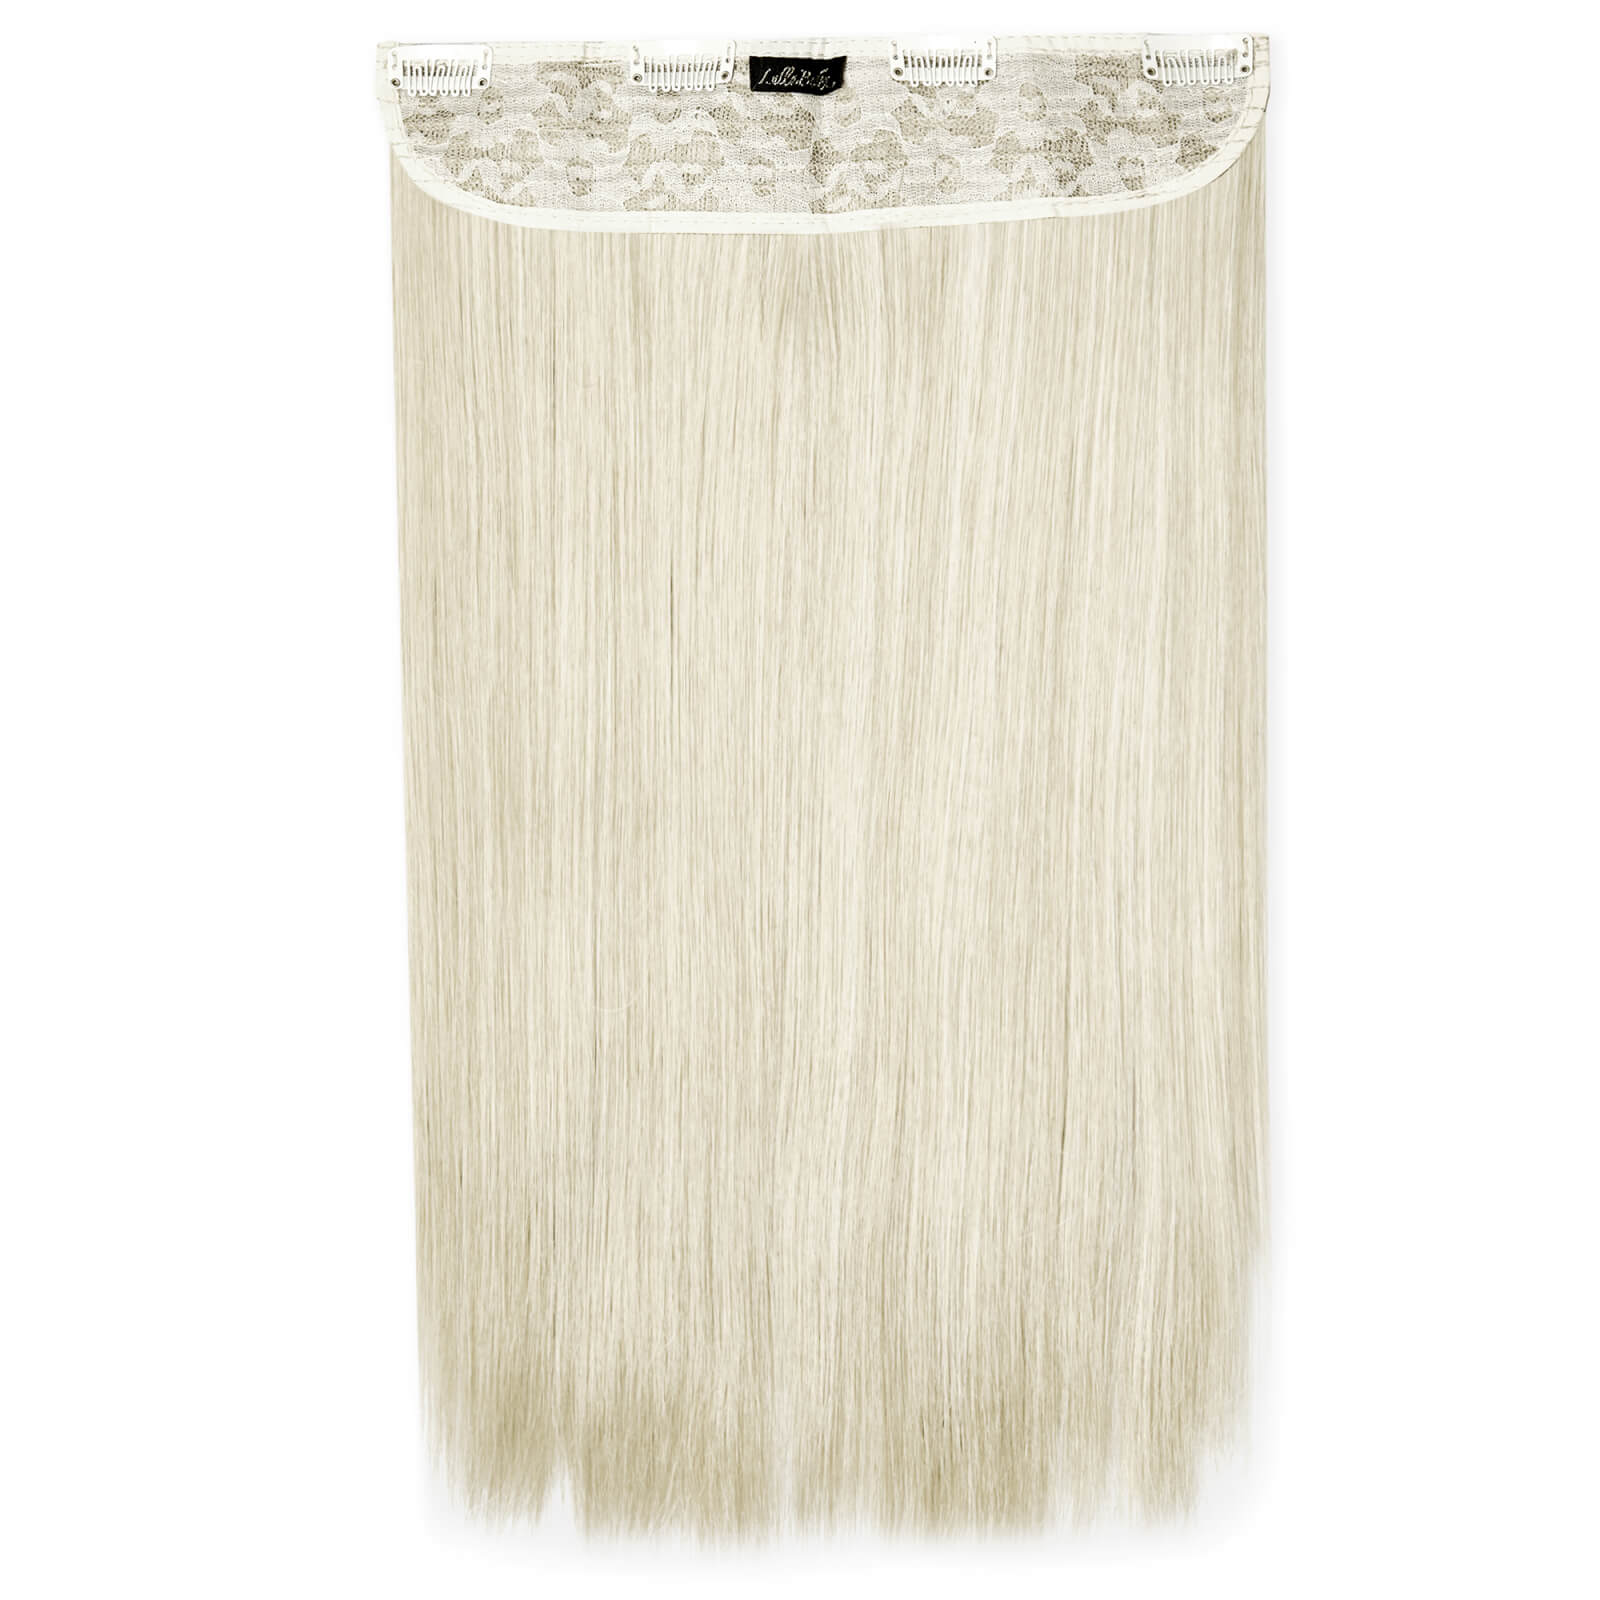 LullaBellz Thick 18 1-Piece Straight Clip in Hair Extensions (Various Colours) - Bleach Blonde